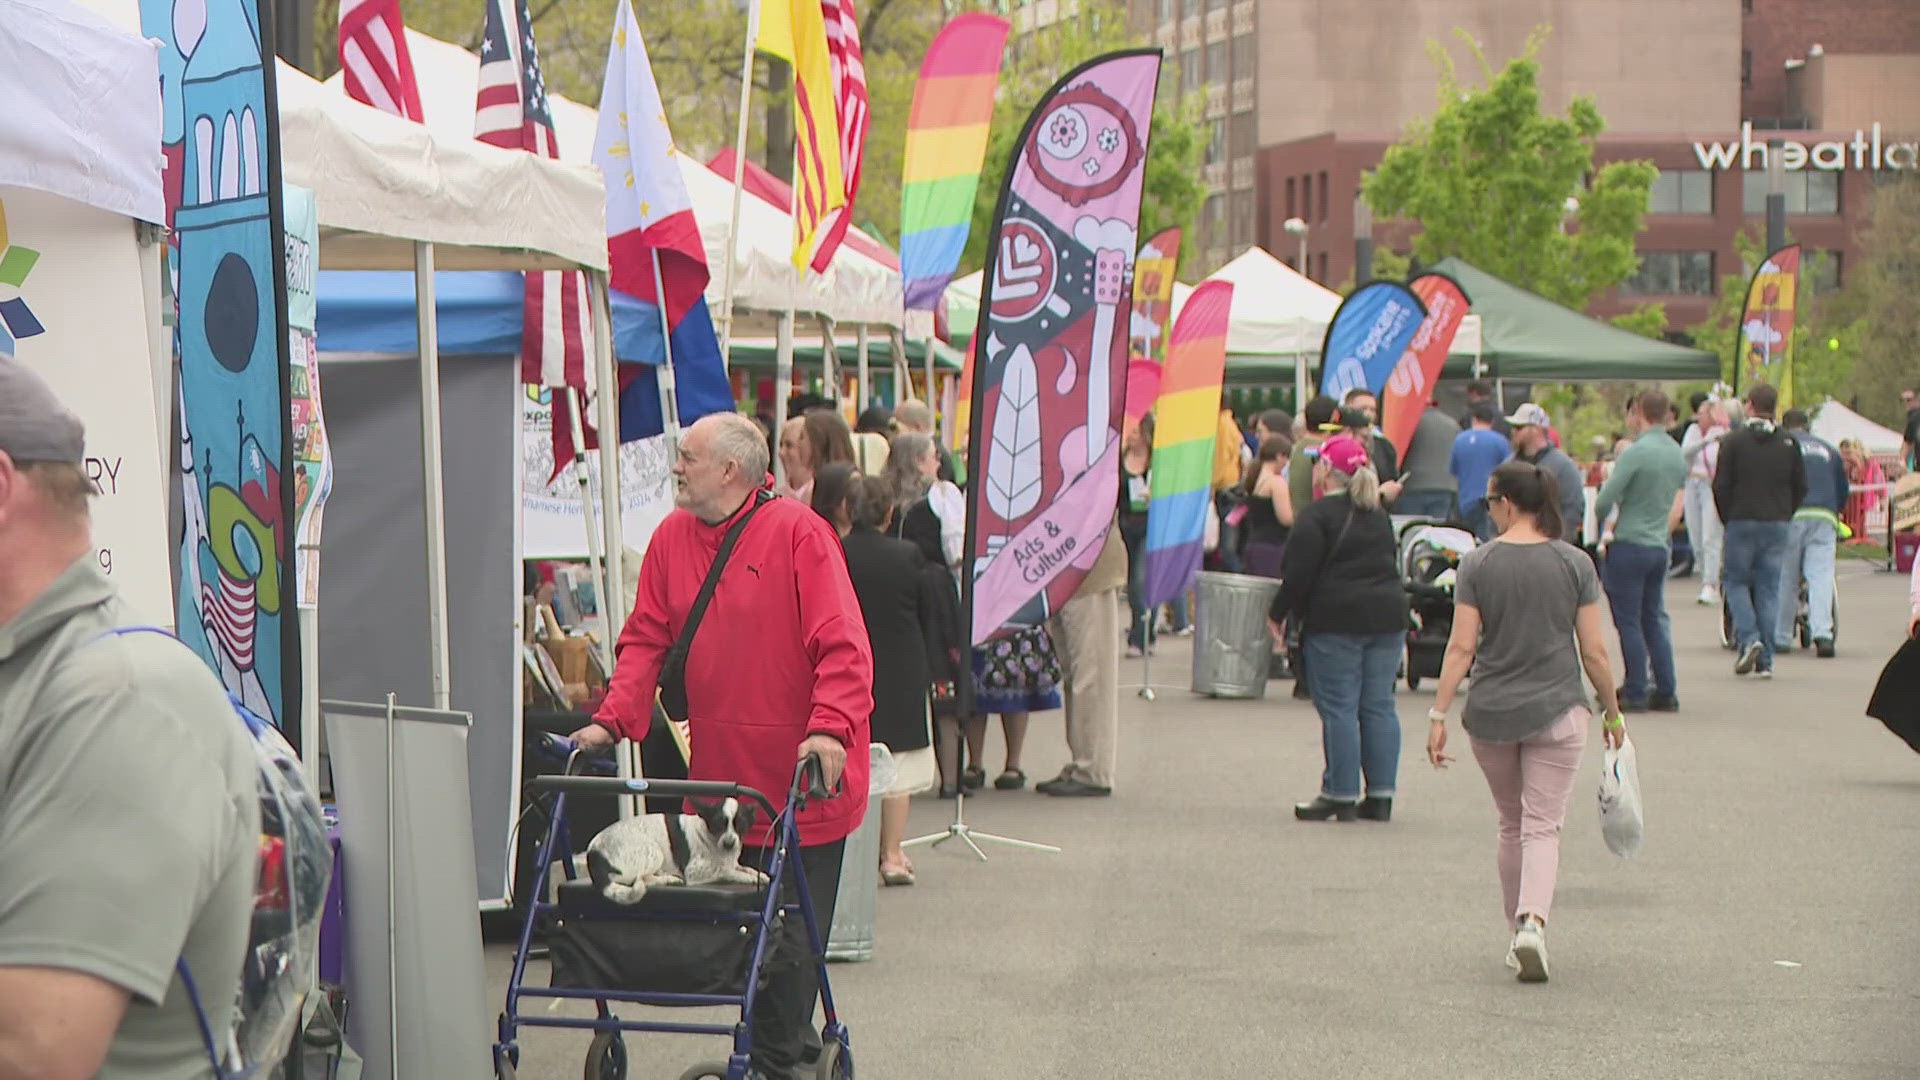 Dozens of performers and vendors welcomed the crowds to the 2 month-long celebration.